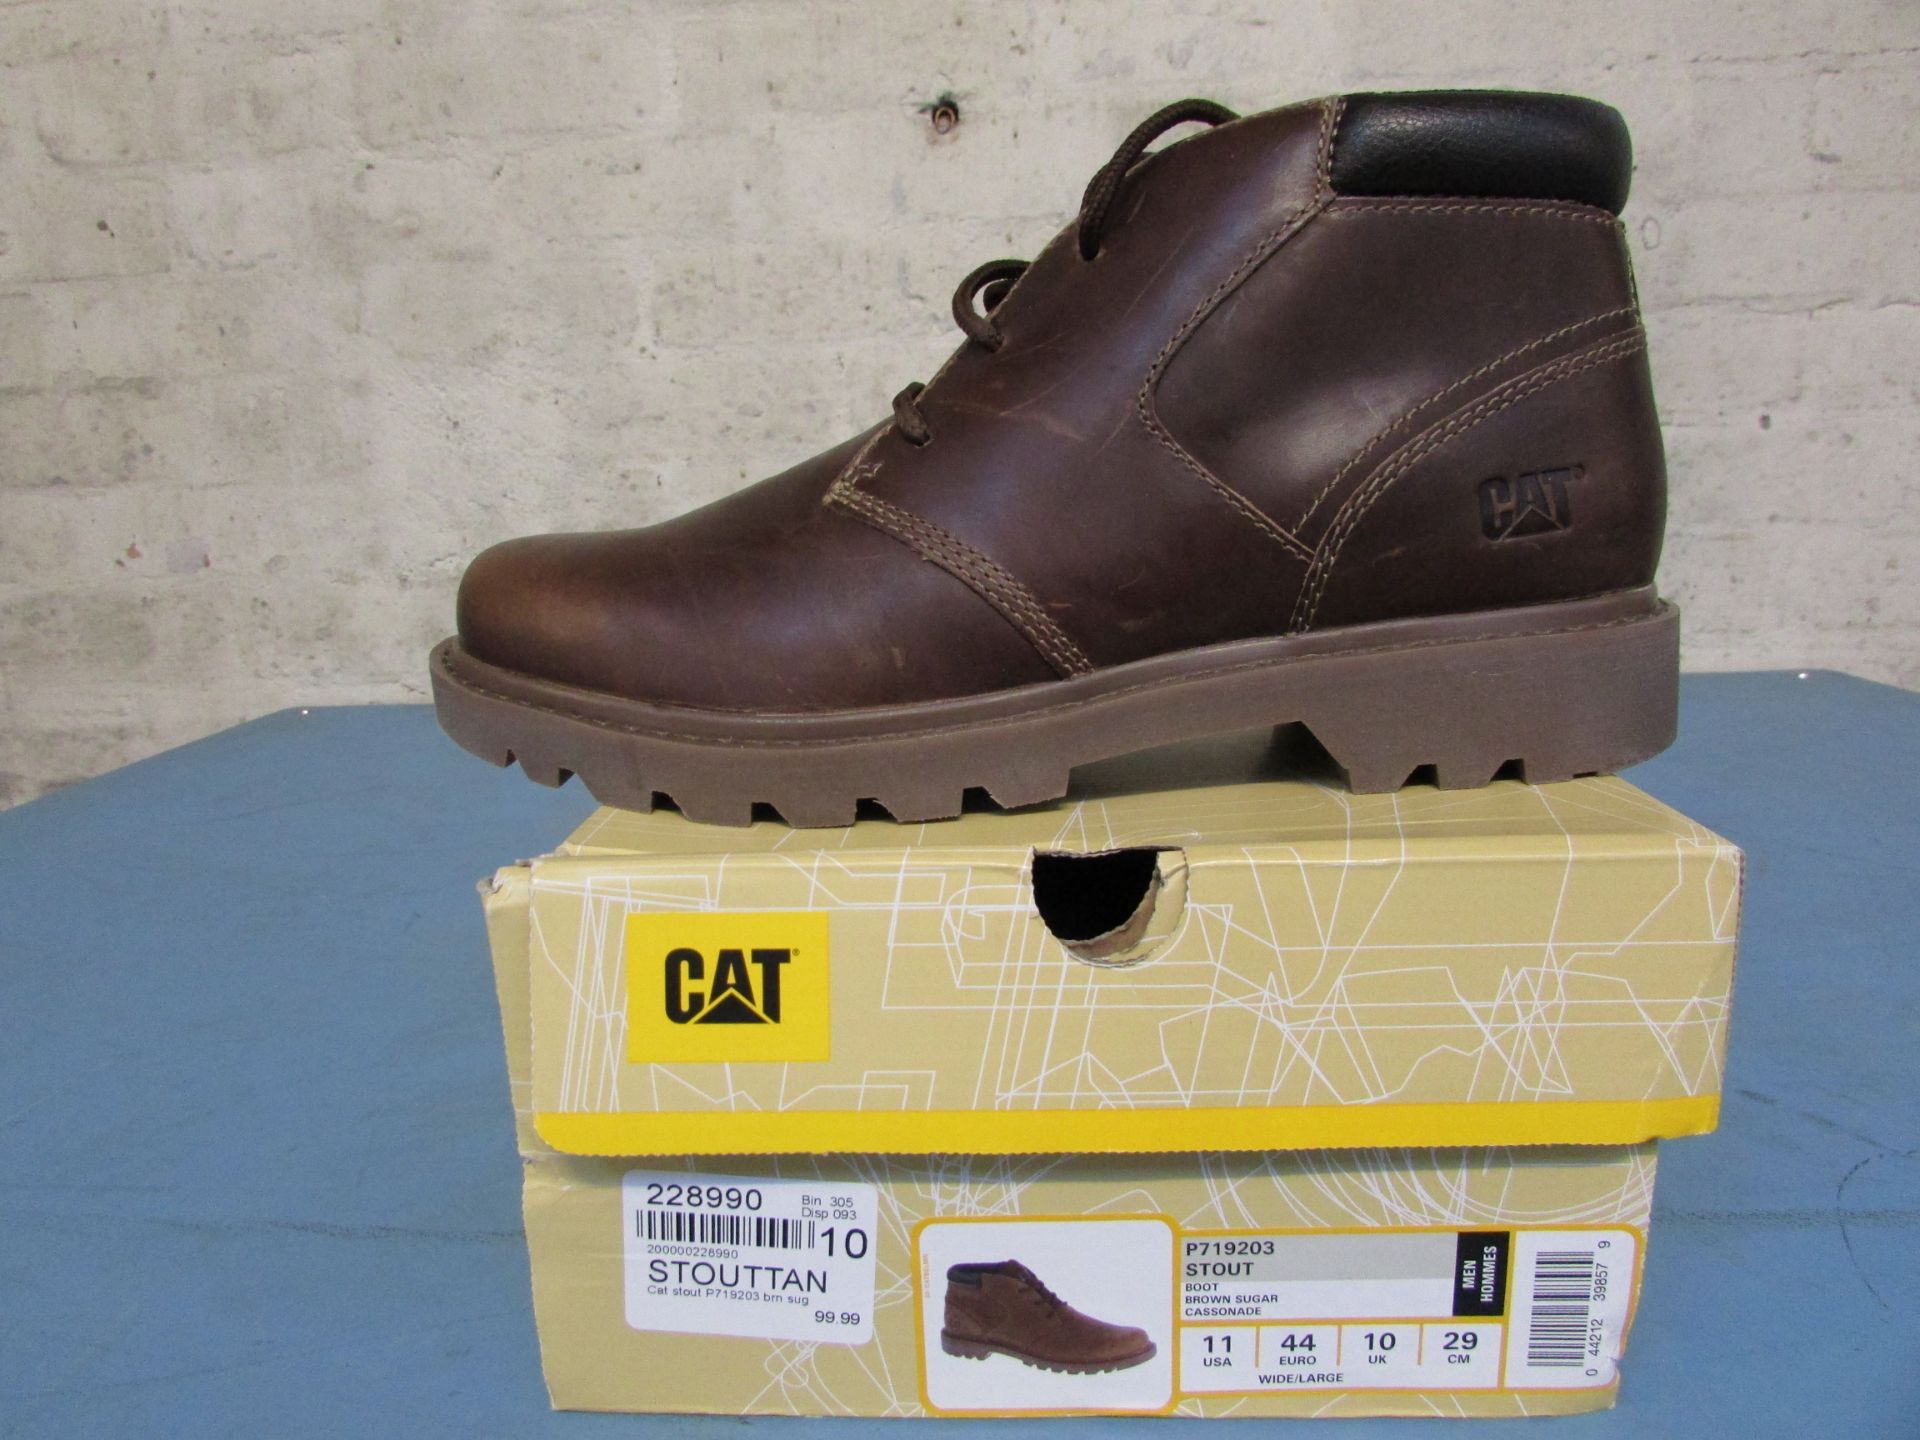 CAT STOUT BOOT IN BROWN UK SIZE 9 CURRENT SELLING PRICE £70